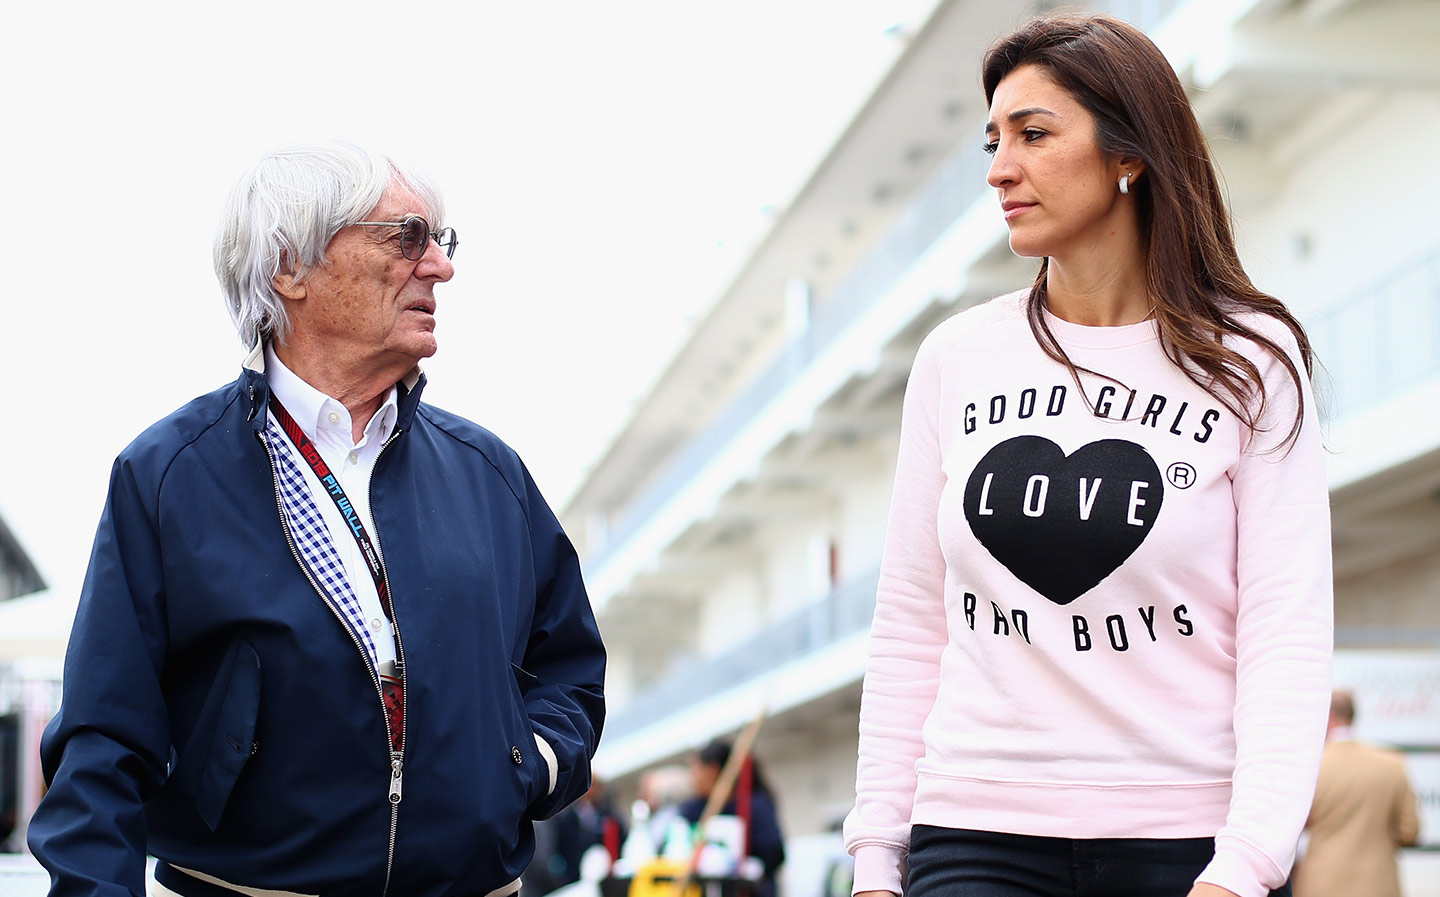 Bernie Ecclestone to become a father again to first son at the age of 89